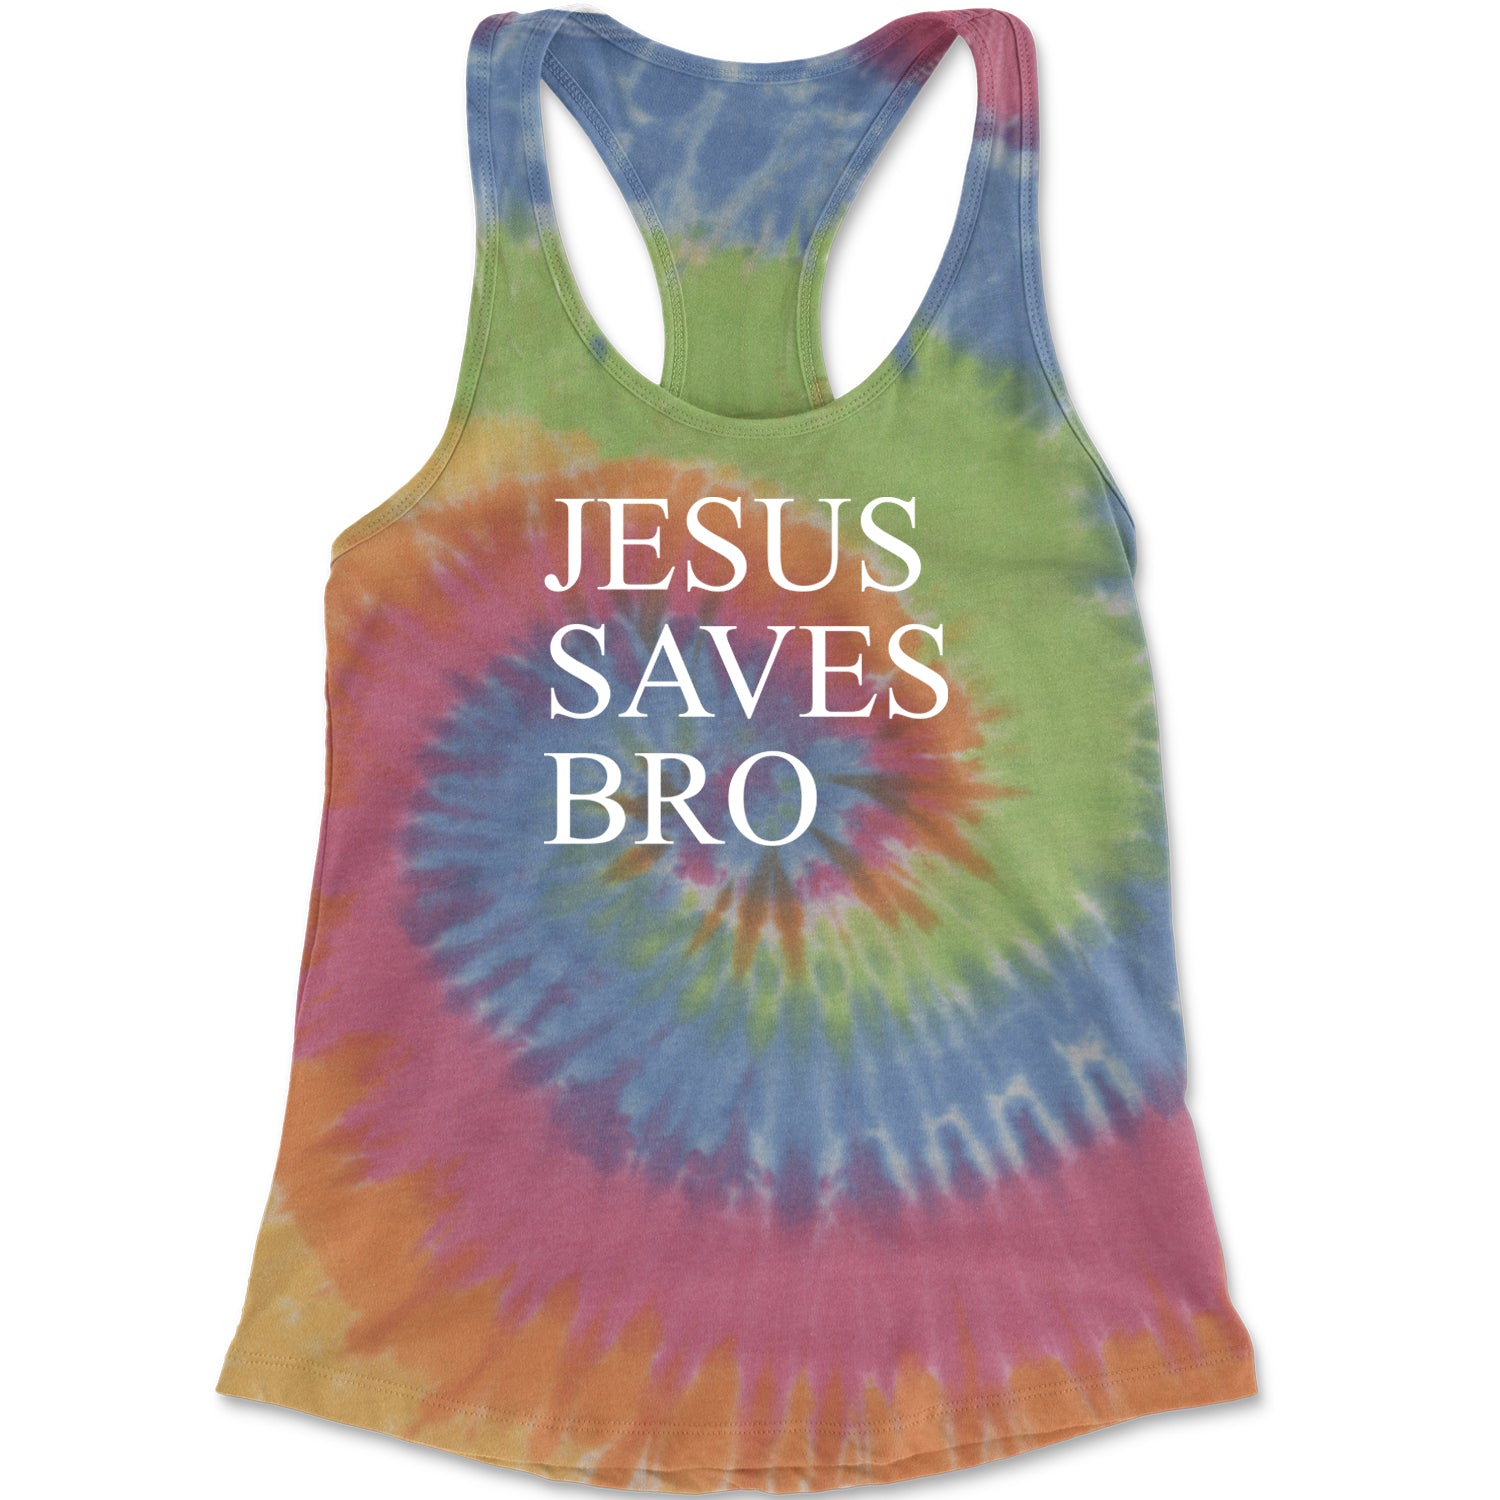 Jesus Saves Bro Racerback Tank Top for Women catholic, christian, christianity, church, jesus, religion, religuous by Expression Tees